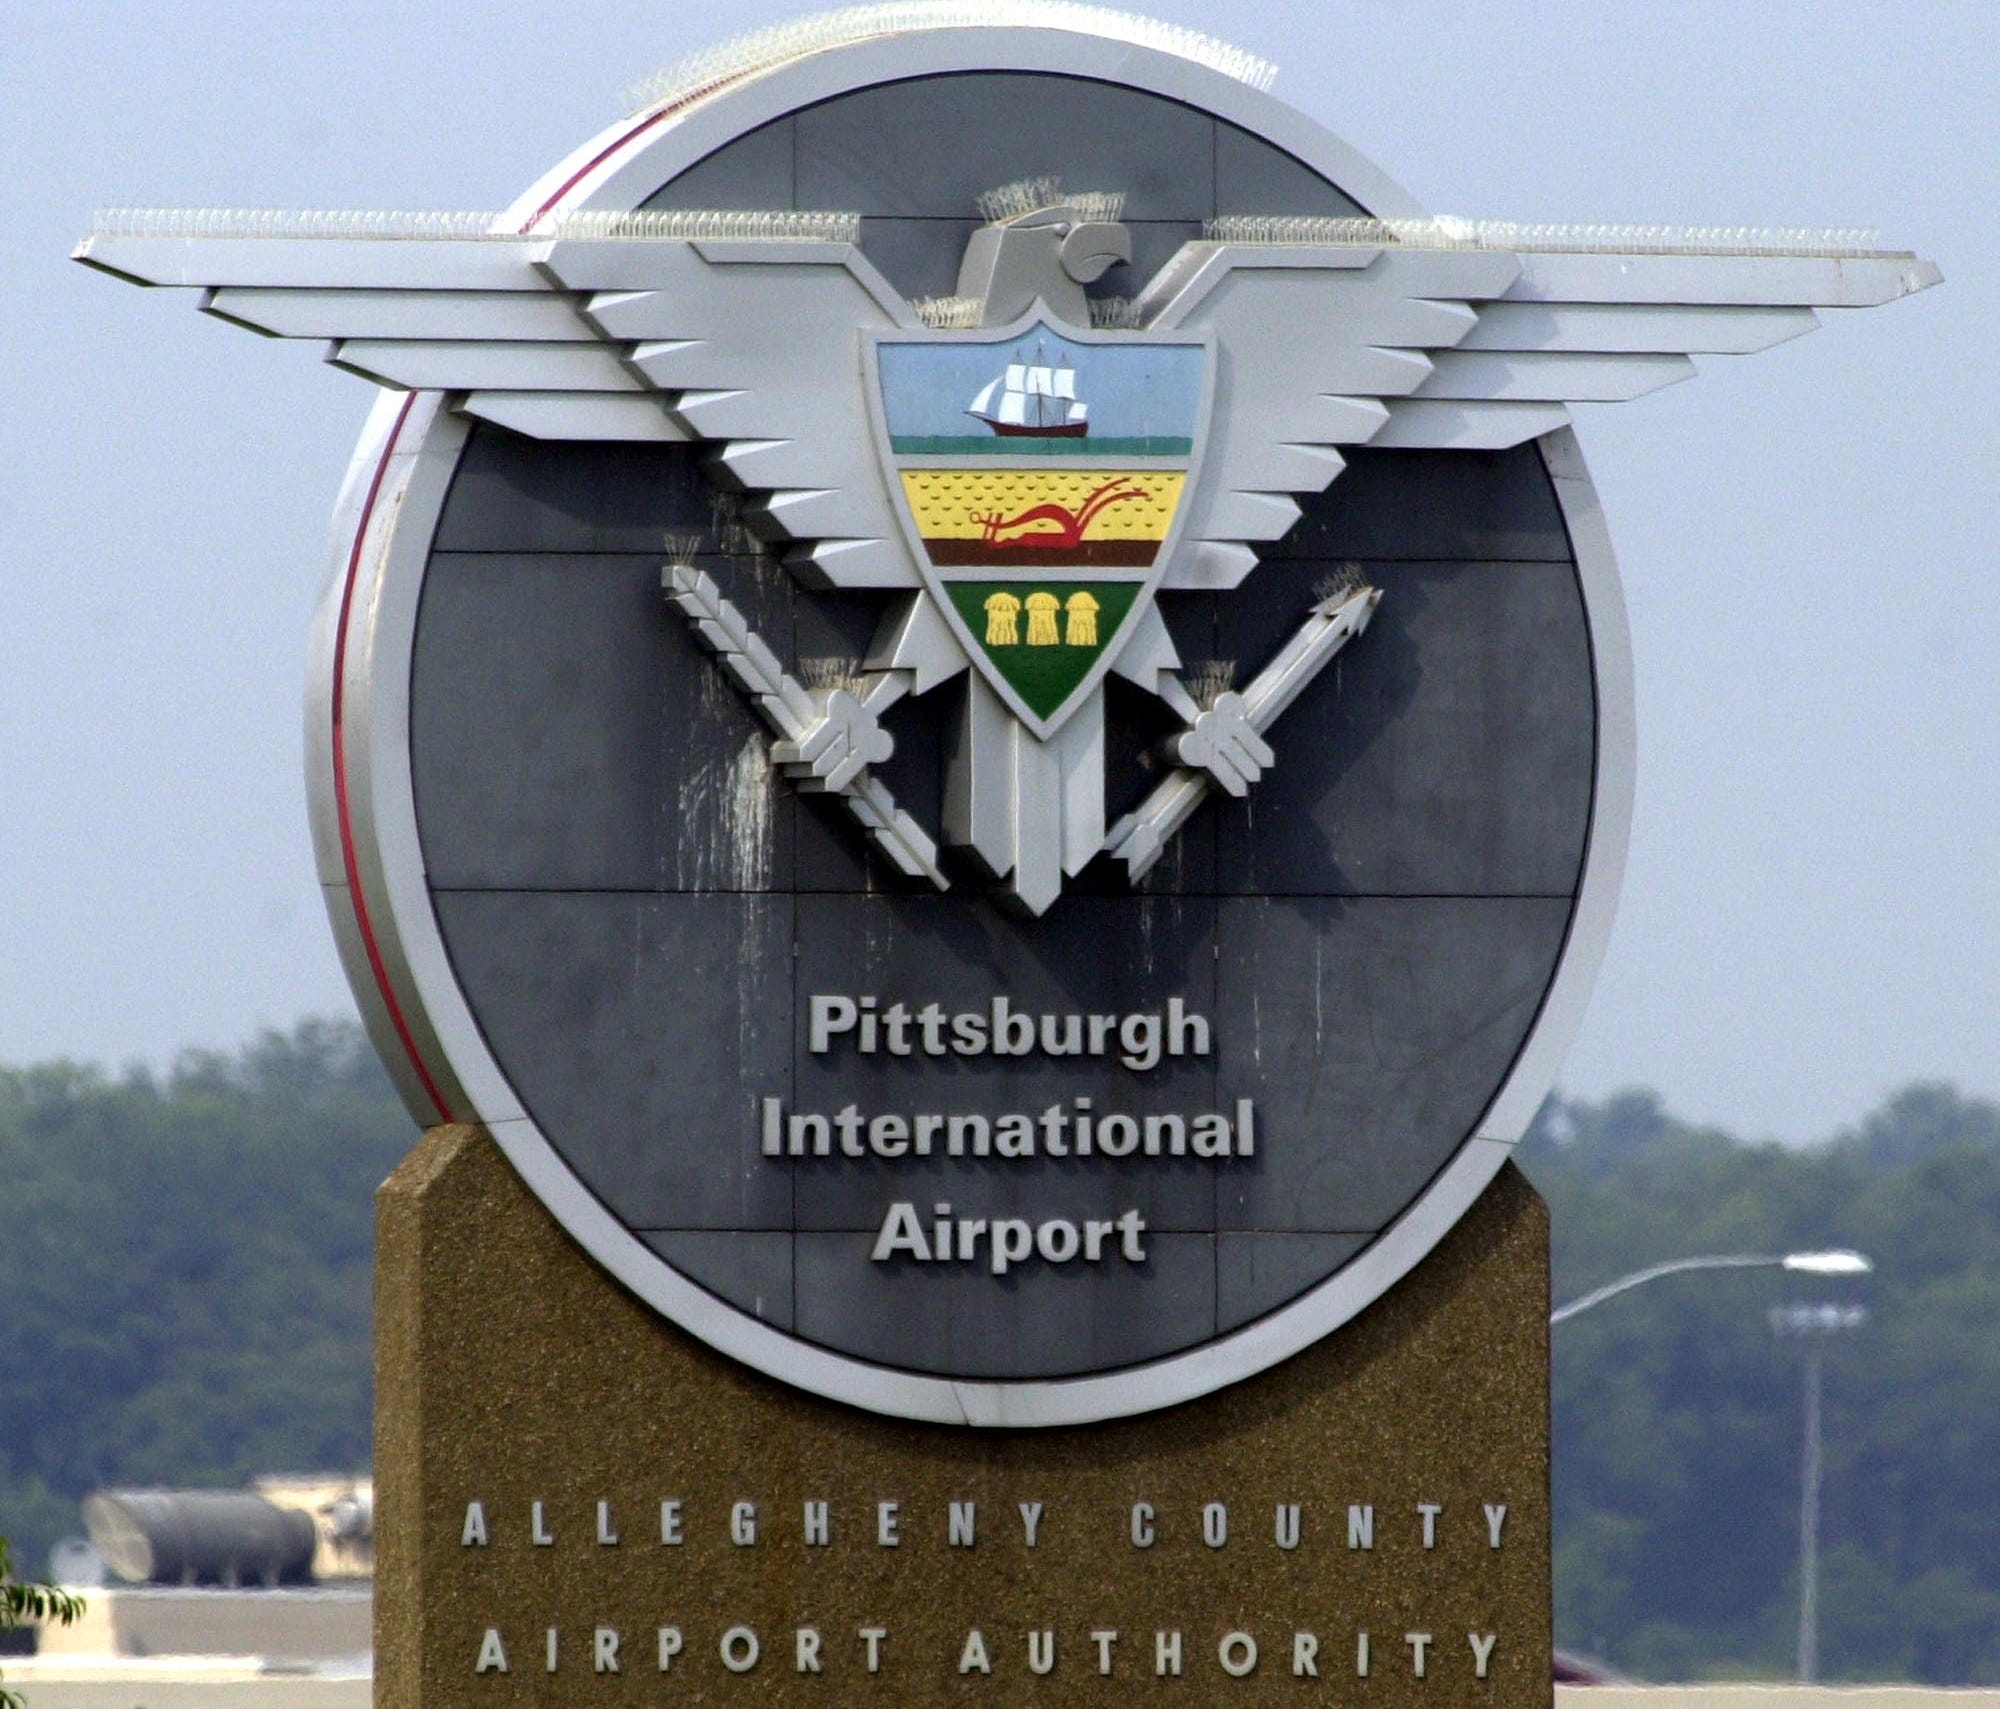 A sign for Pittsburgh International Airport is seen near an entrance to the airport on July 29, 2004.